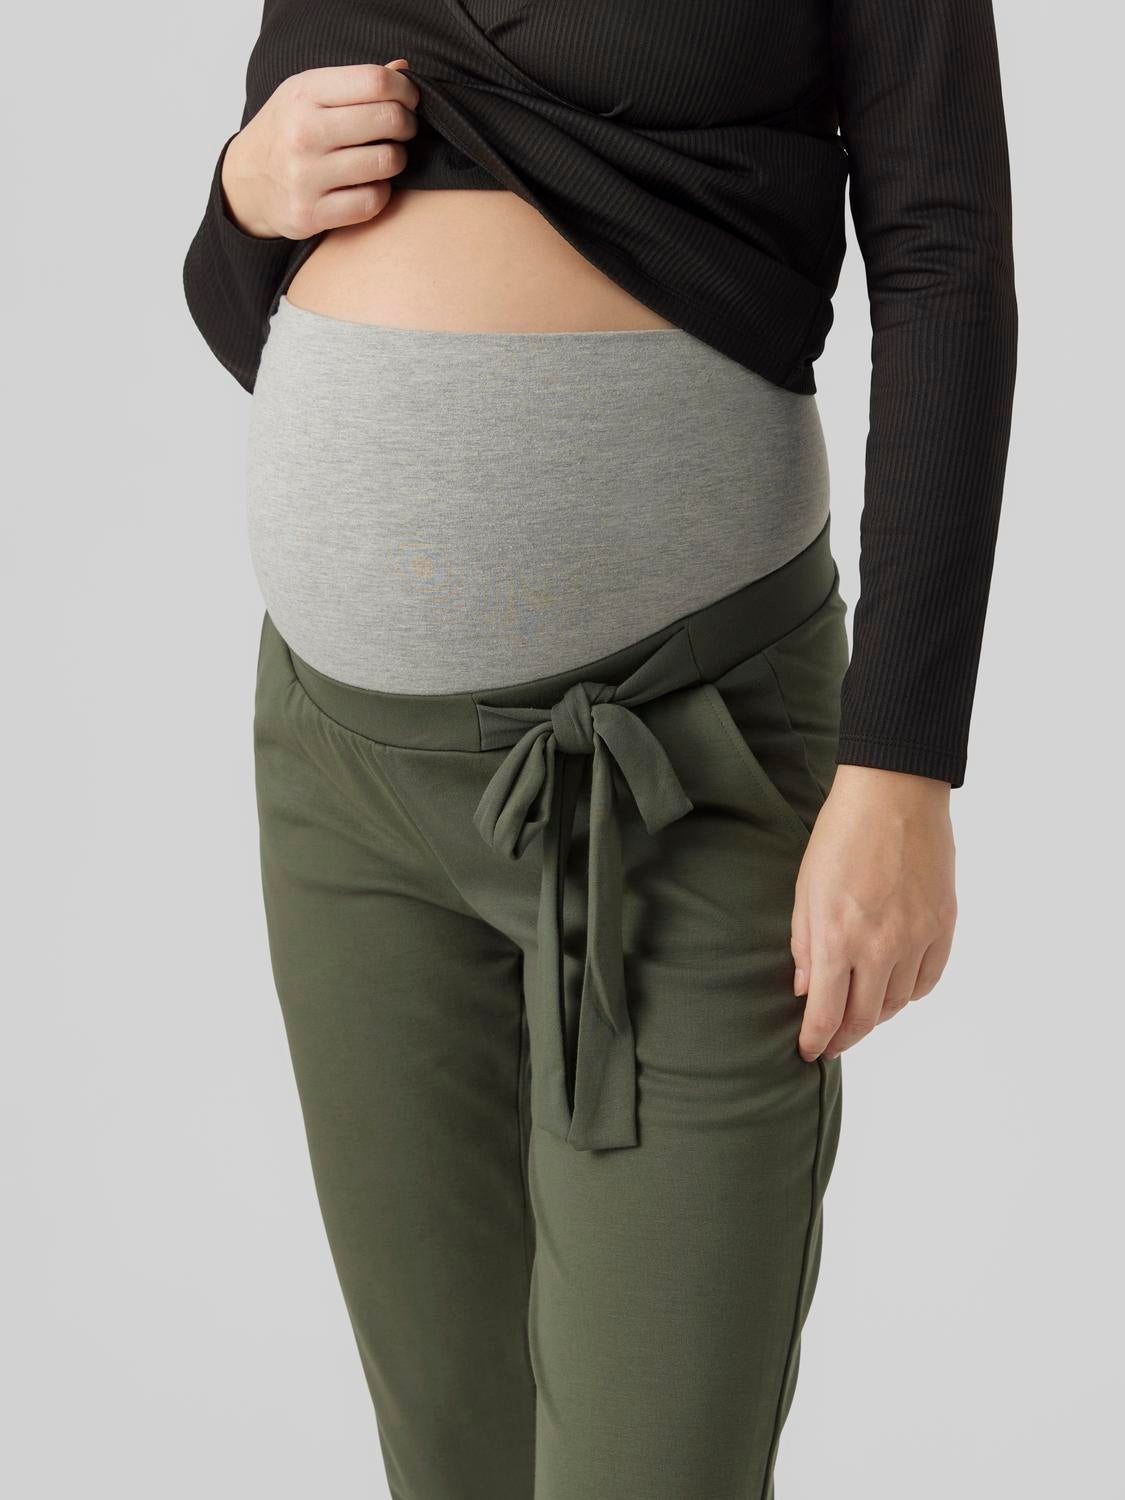 Buy Maternity Trousers, Jogging Trousers, Fitness Trousers, Sweatpants,  Maternity Fashion, Sports Trousers, Pregnancy Fashion Model: DELFI by  Torelle Online in India - Etsy